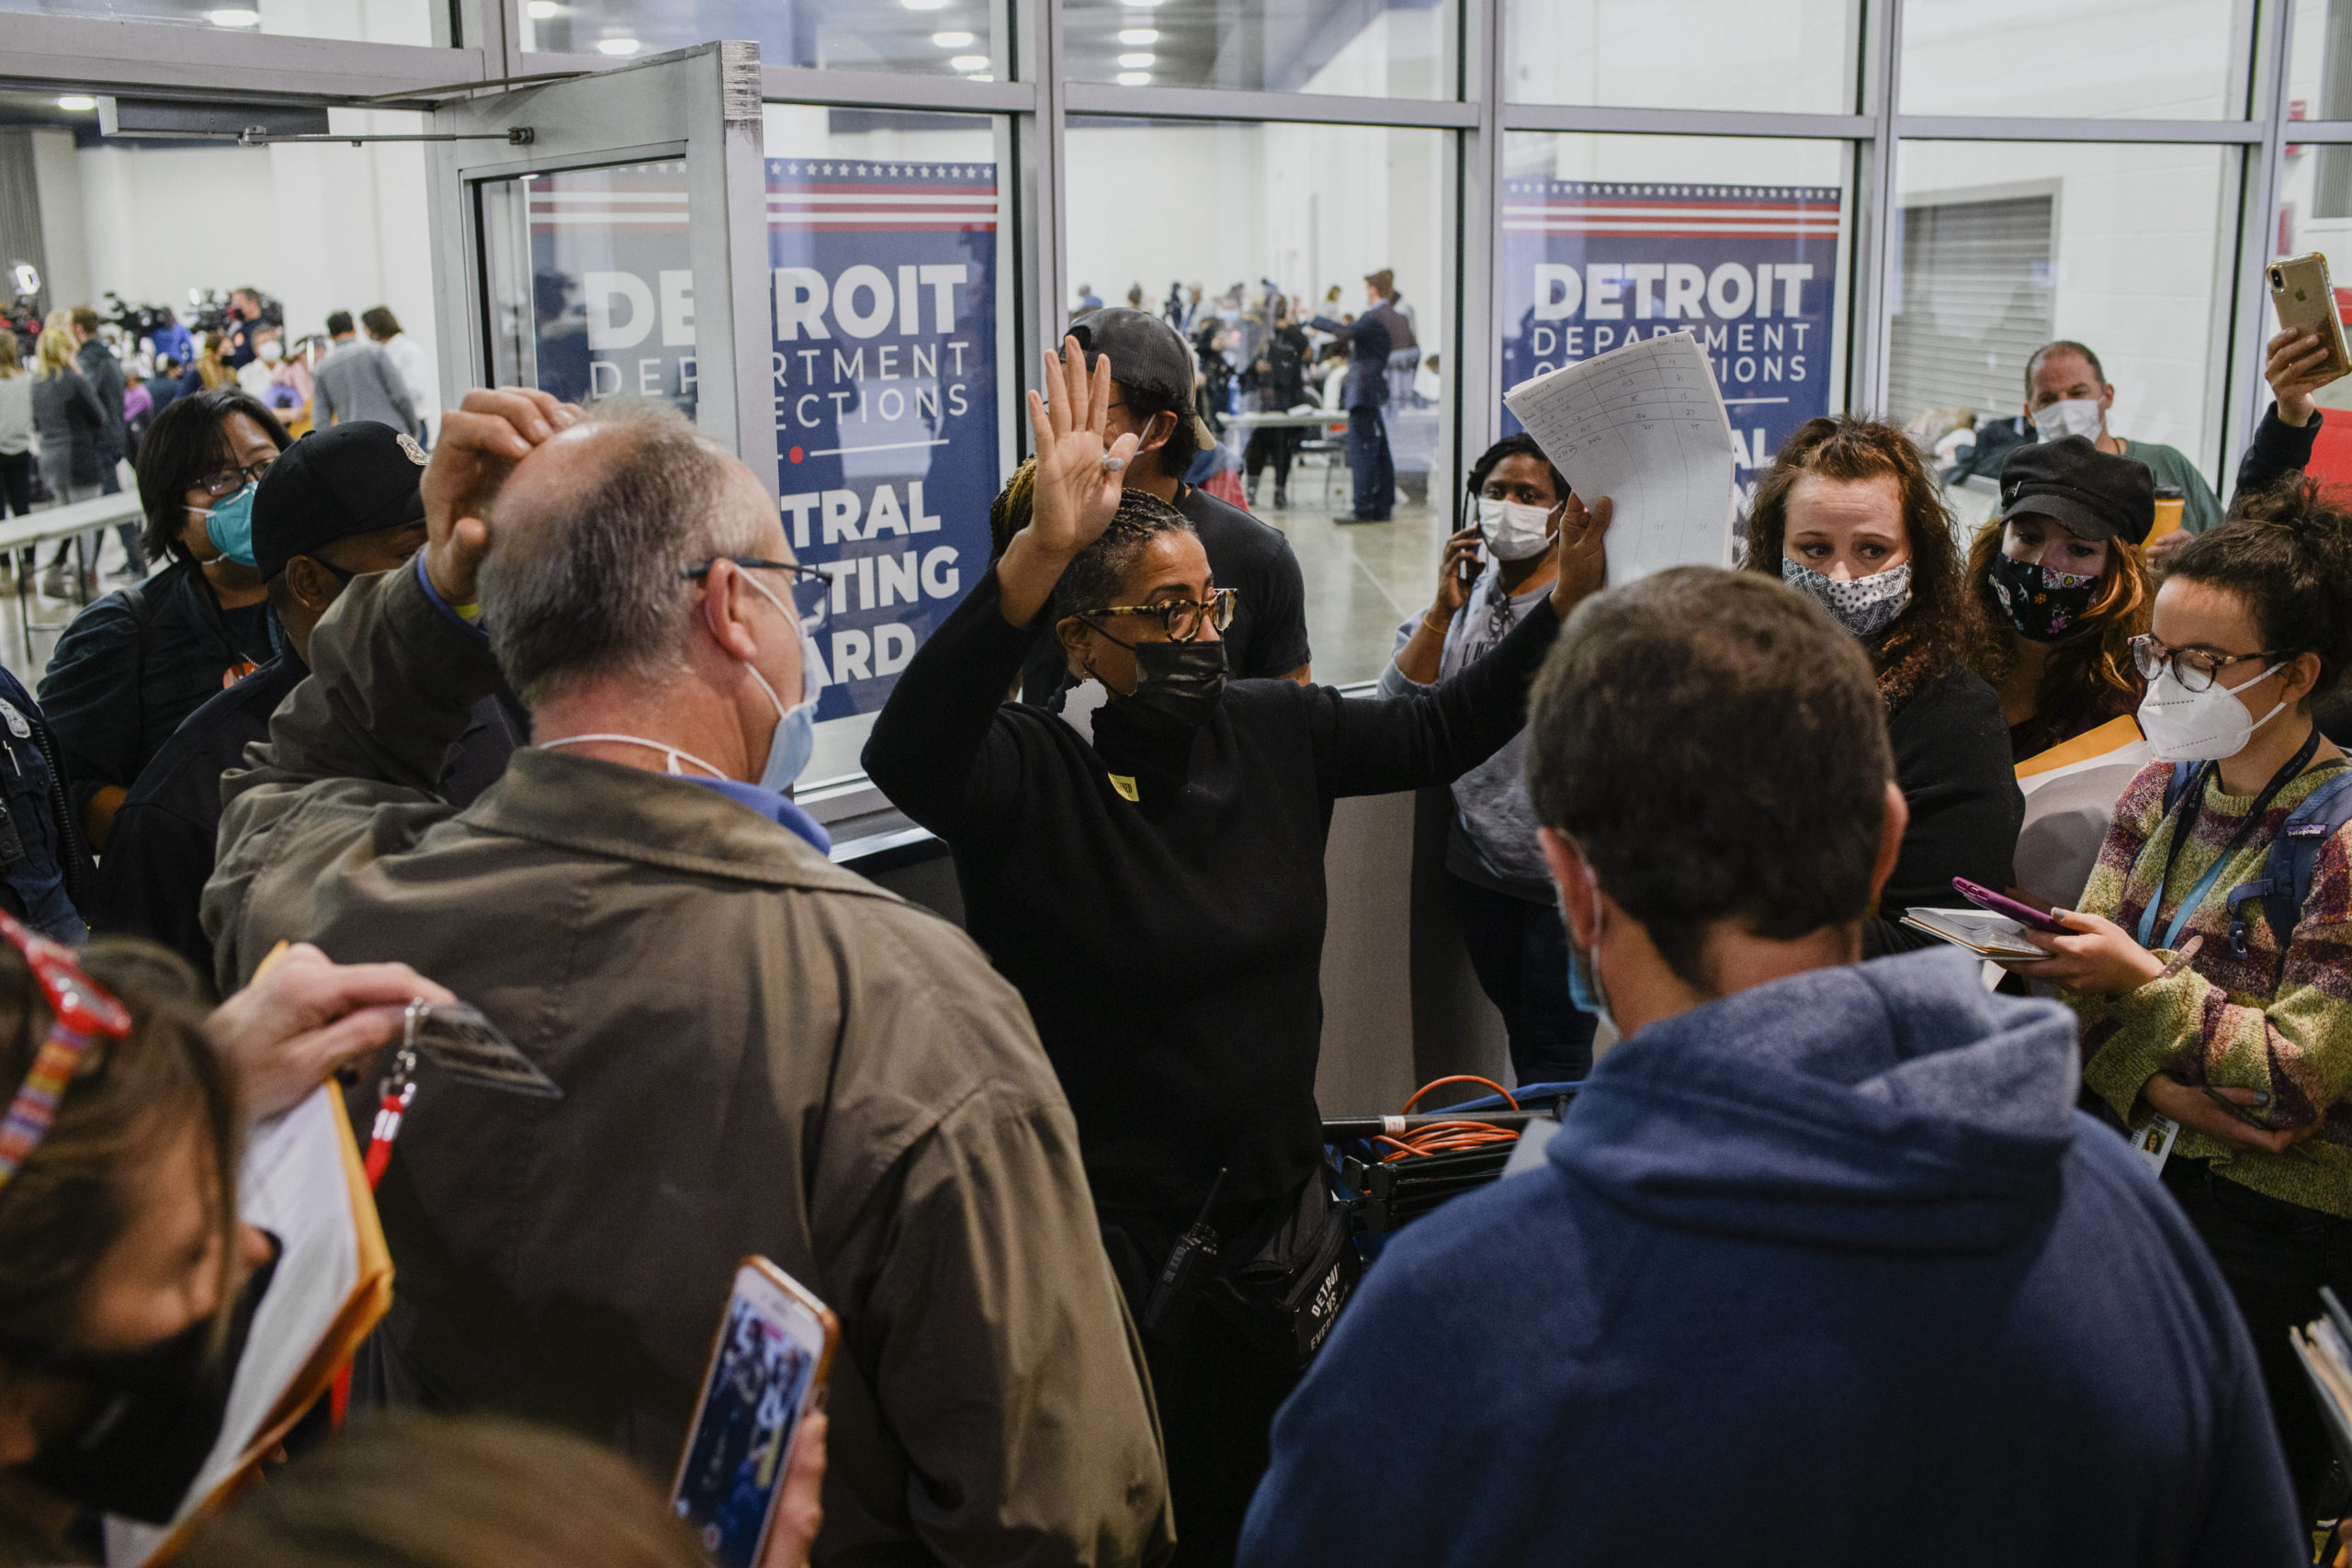 A Detroit Department of Elections worker pushes the crowd back as absentee ballots are counted on Nov. 4, 2020.